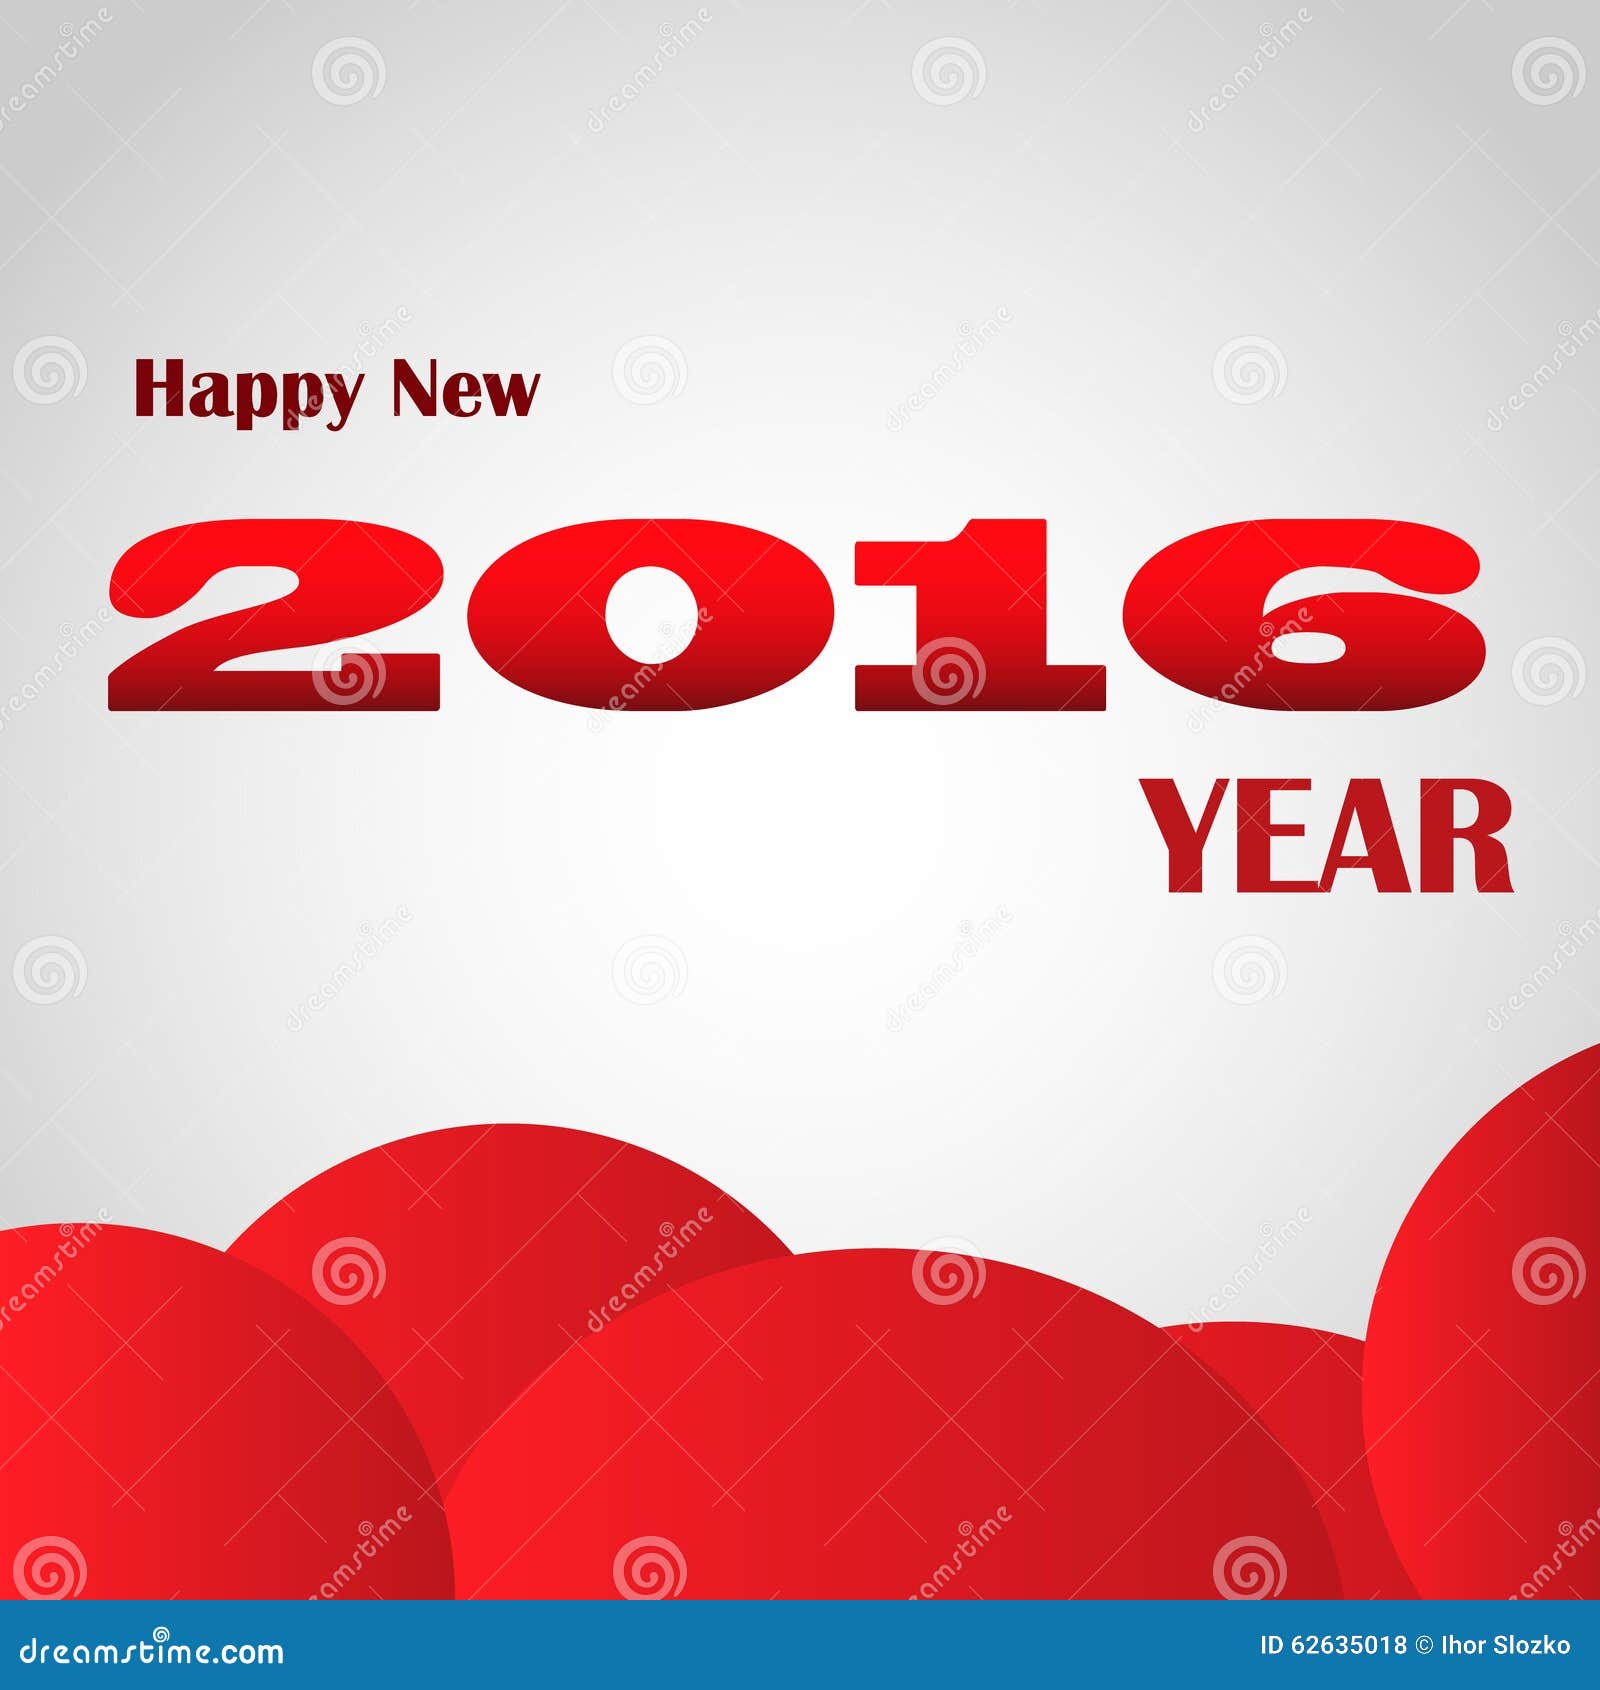 happy new year grey background red cloudy circles 62635018